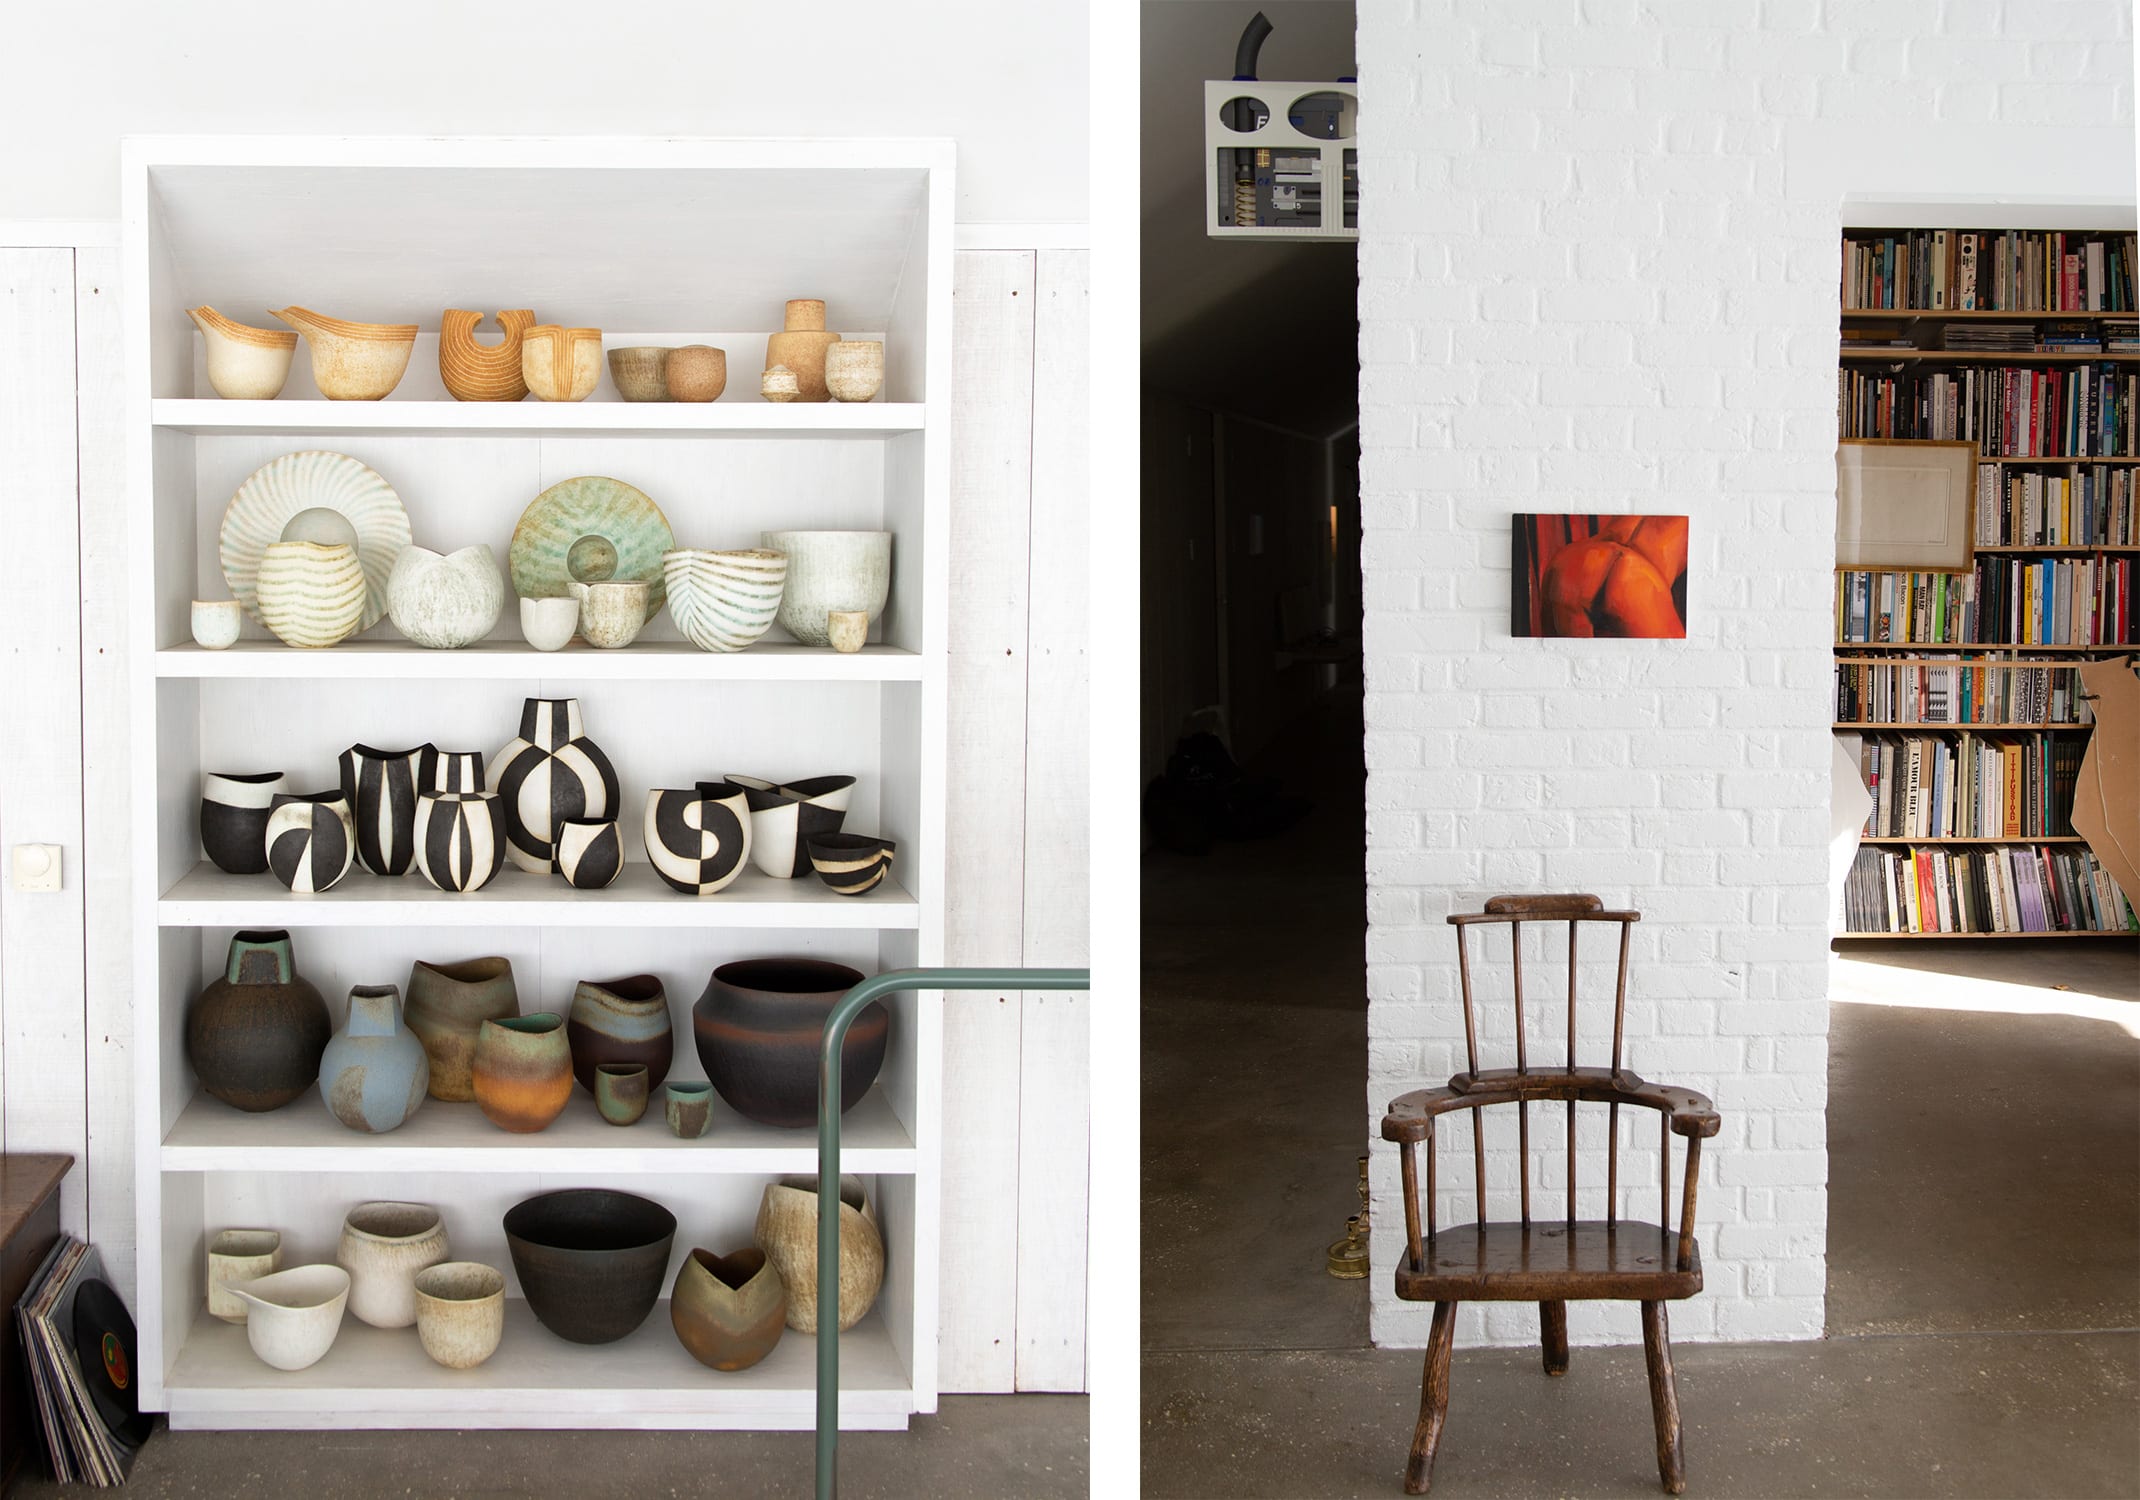 Left: Ceramics by John Ward. Right: In the left upper corner is Maglia Reus's sculpture Leaves (Geneva, November), from 2015; above the chair, Gillian Carnegie's Red, from 2004.